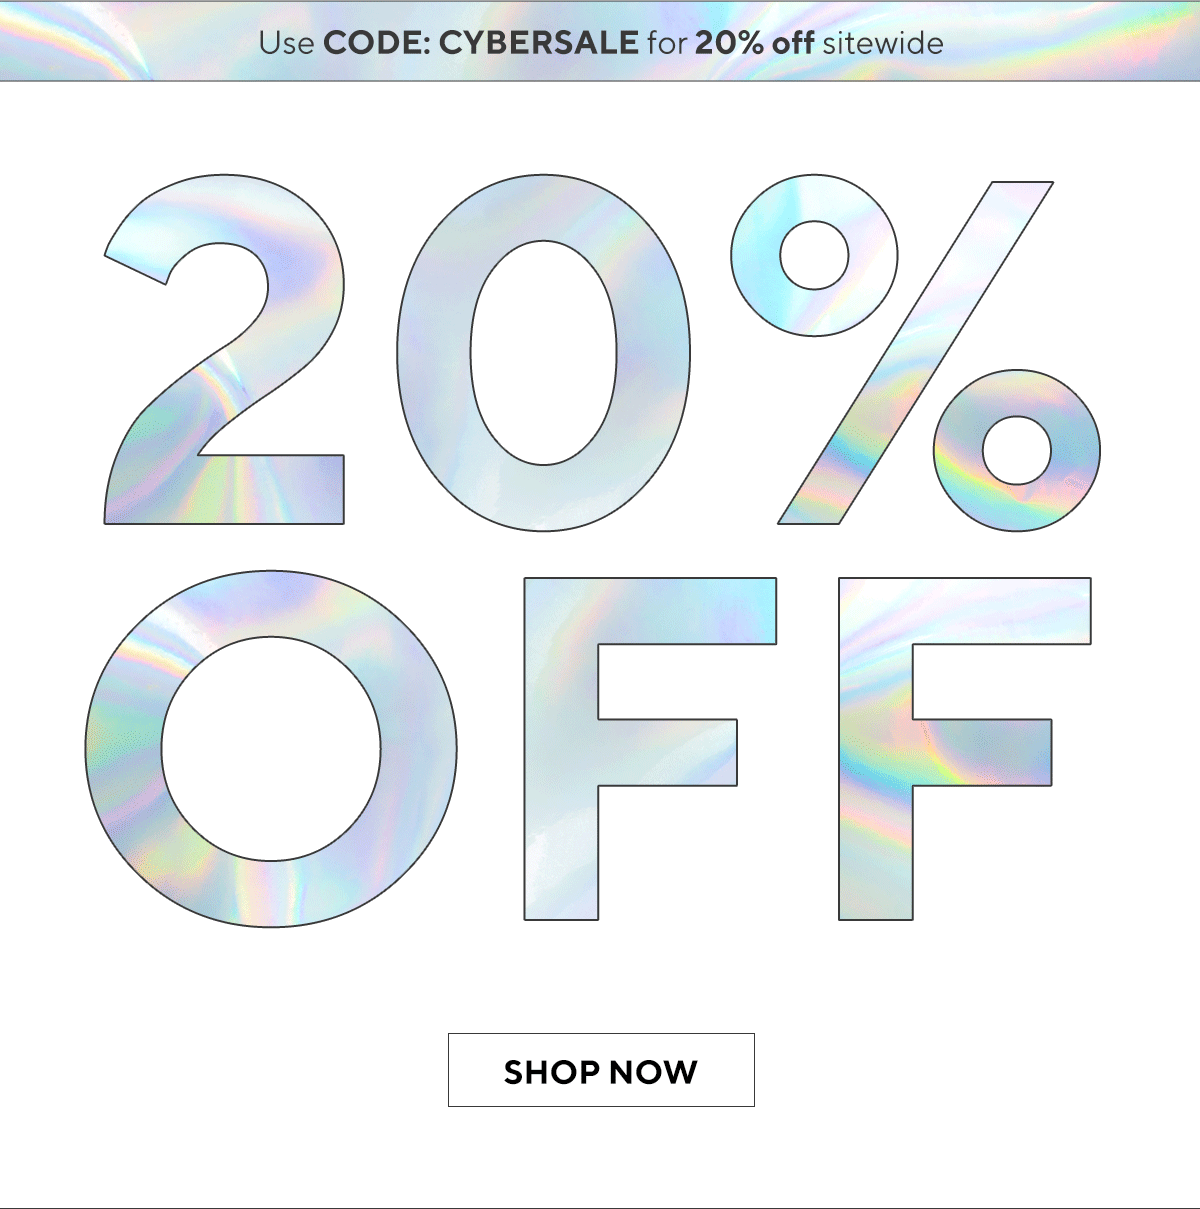 Cyber Monday! 20% off sitewide with code CYBERSALE